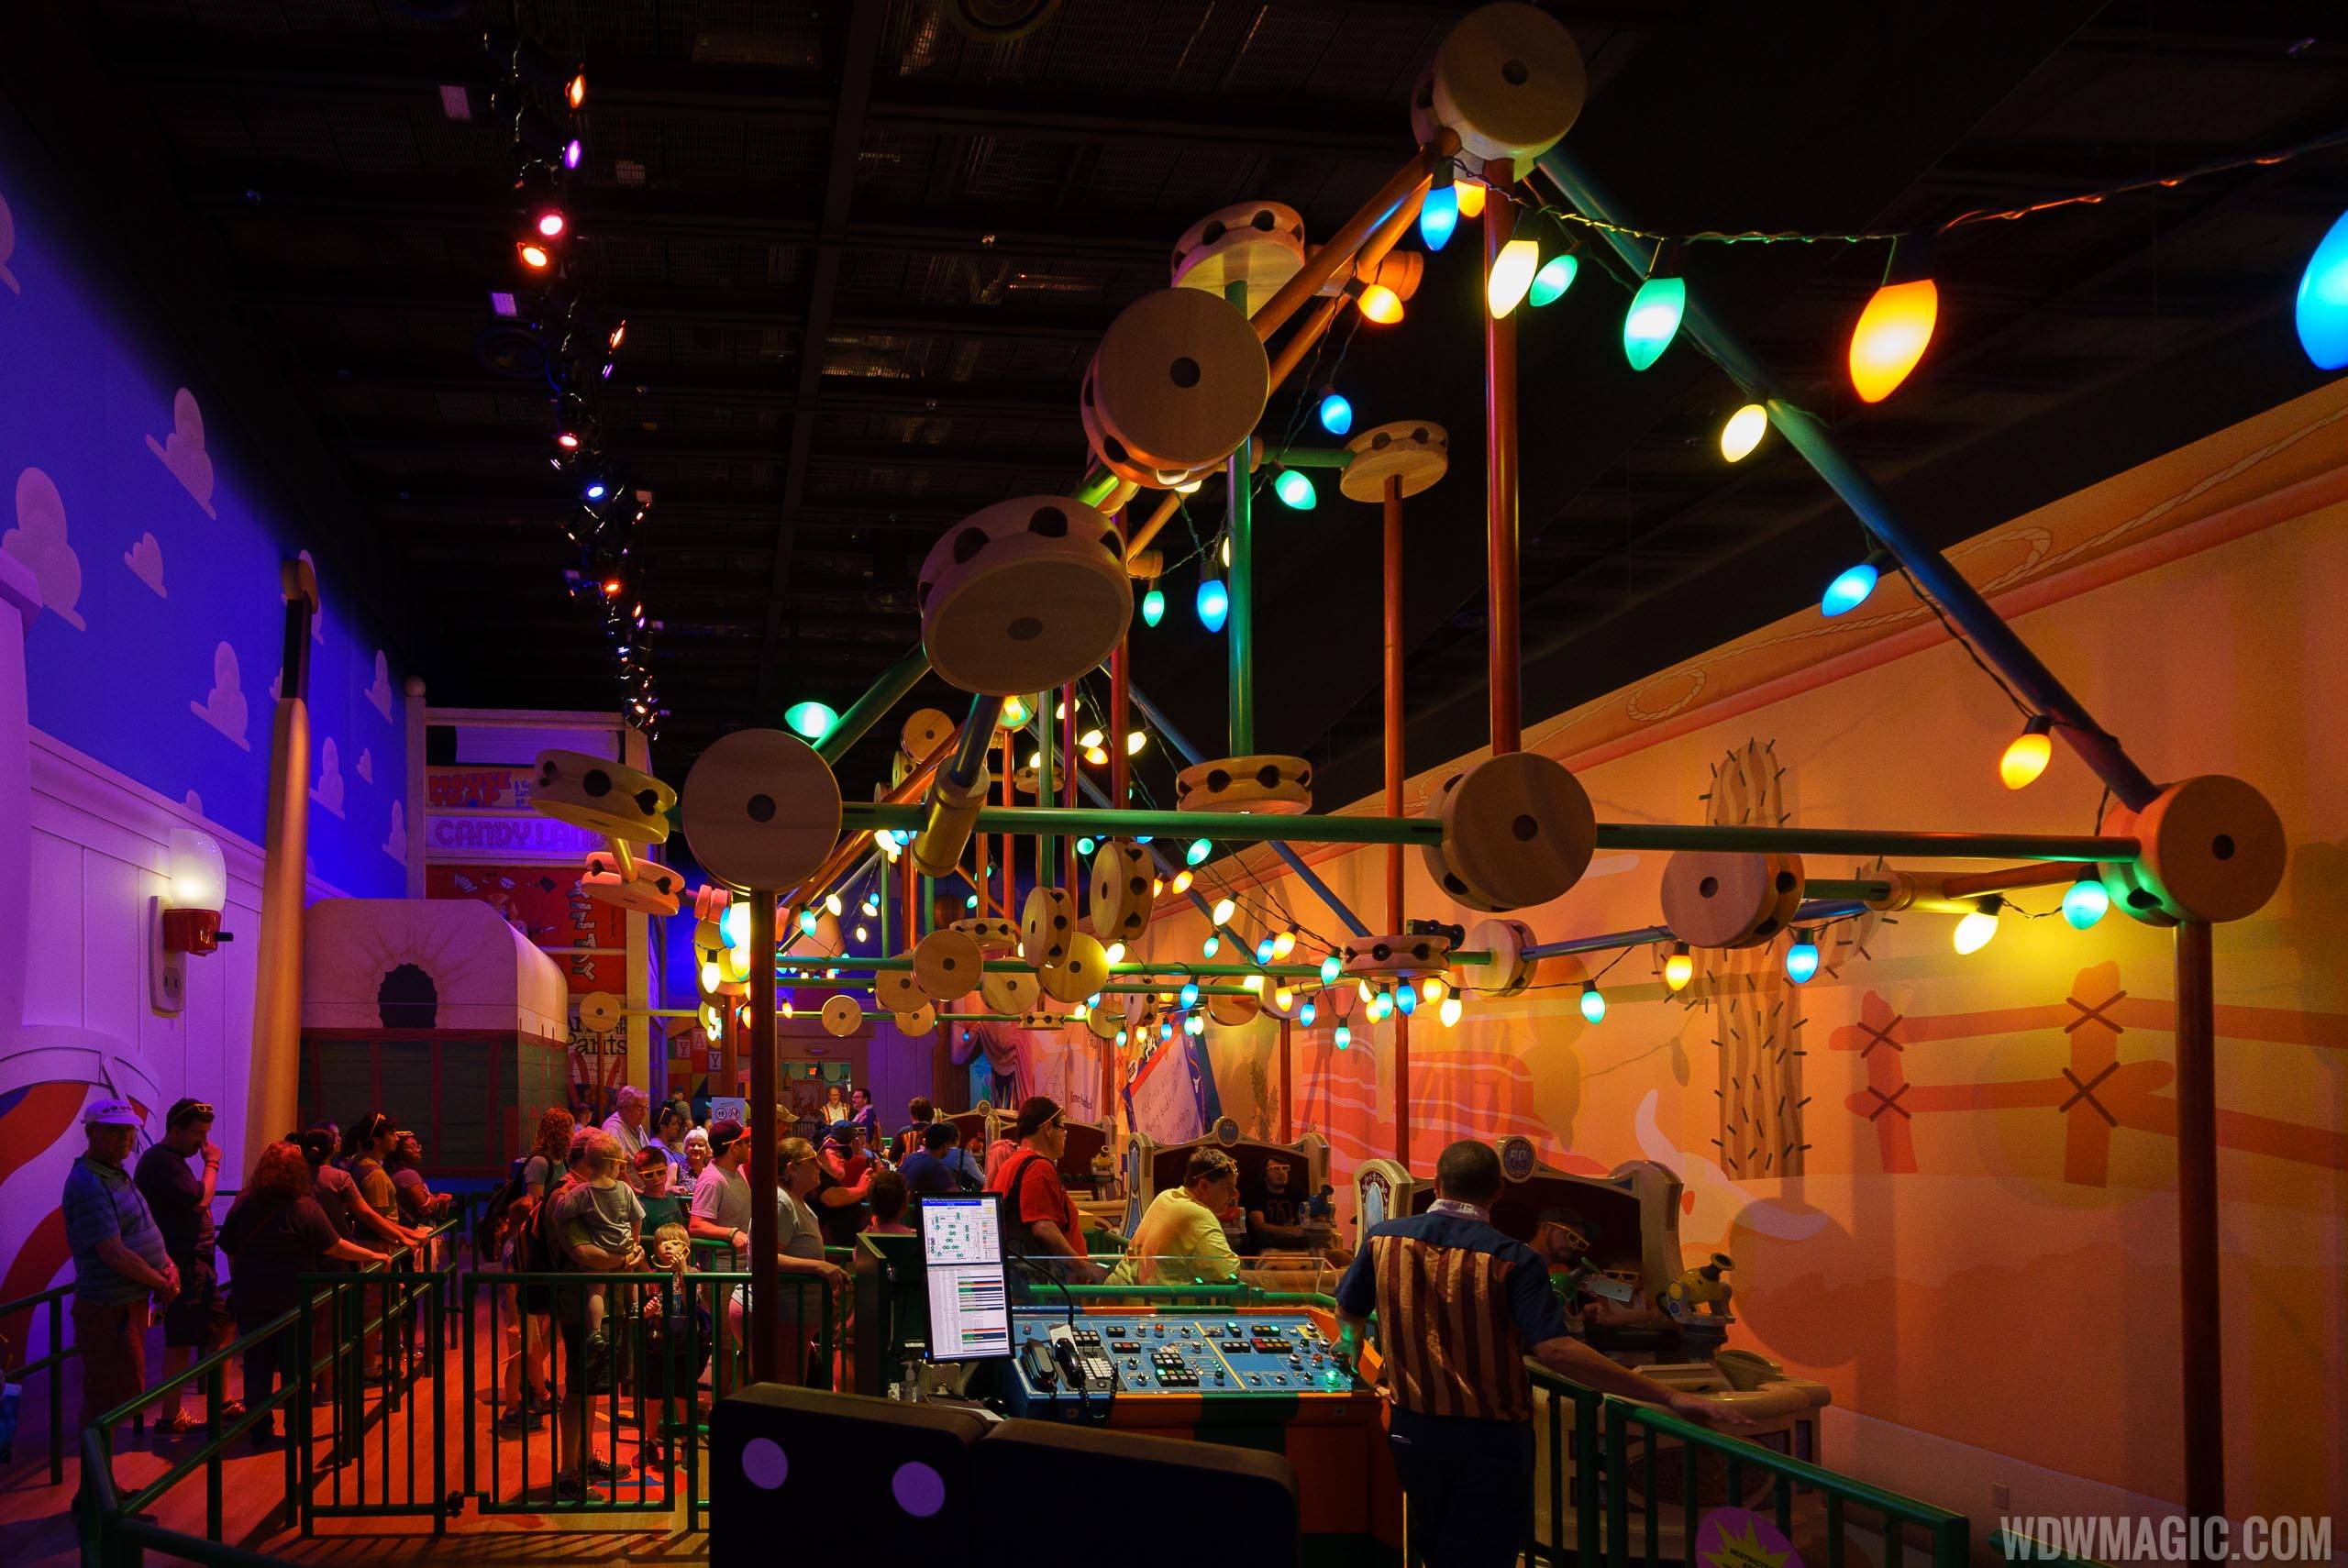 PHOTOS - Disney cuts wait times at Toy Story Mania with the opening of a third track